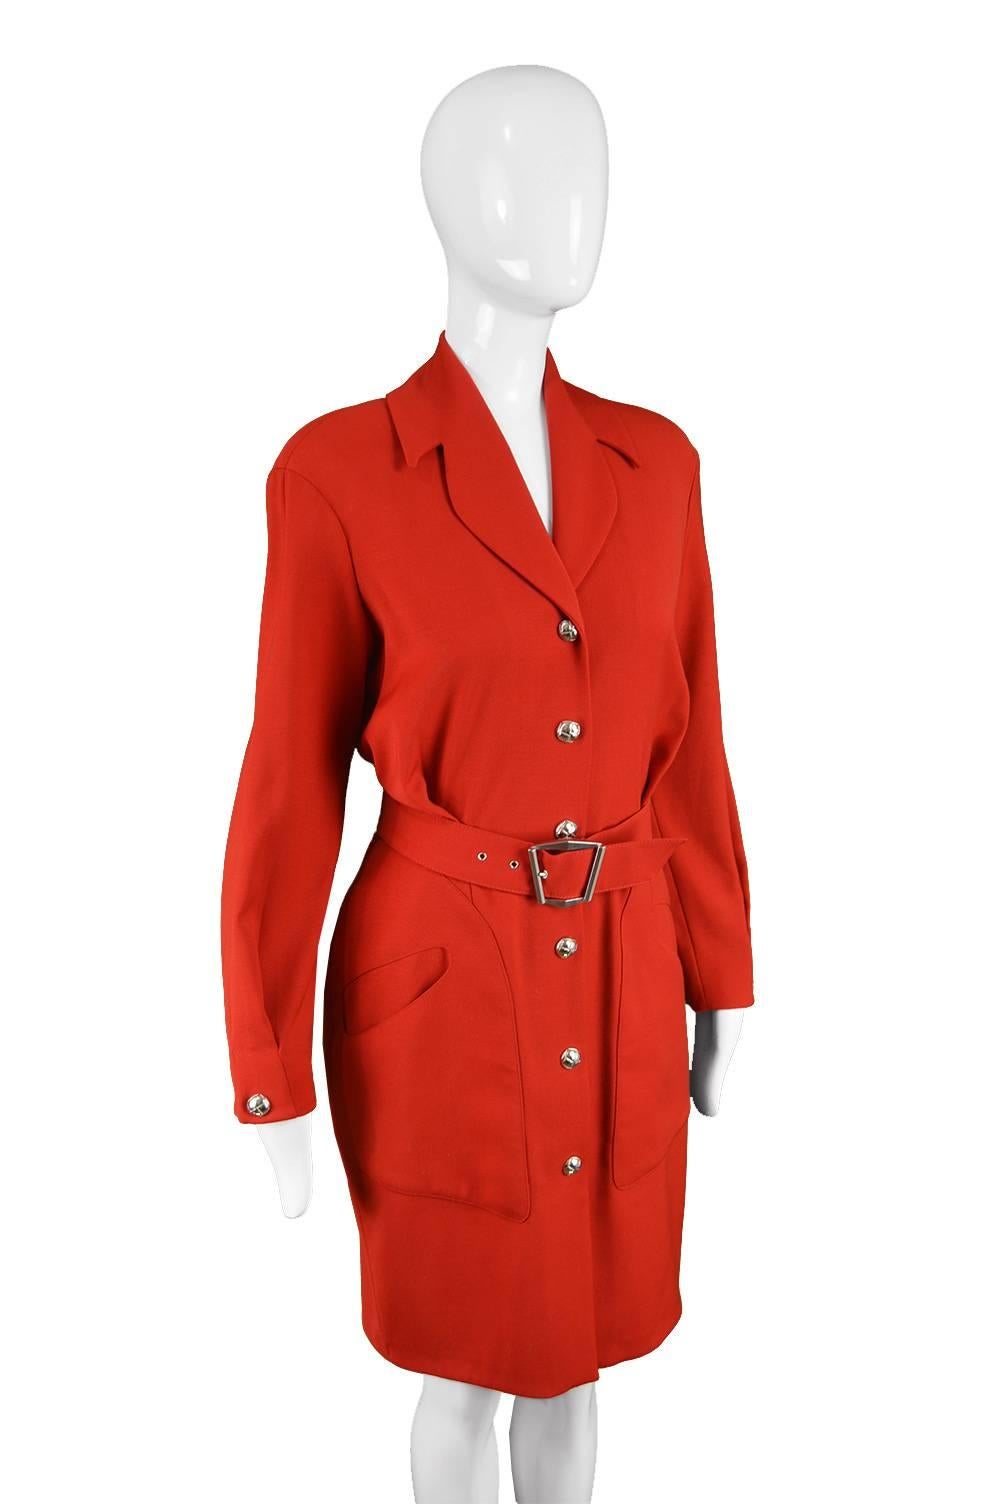 Thierry Mugler Vintage 1980s Red Wool Long Sleeve Blouson Fit Shirt Dress In Excellent Condition For Sale In Doncaster, South Yorkshire